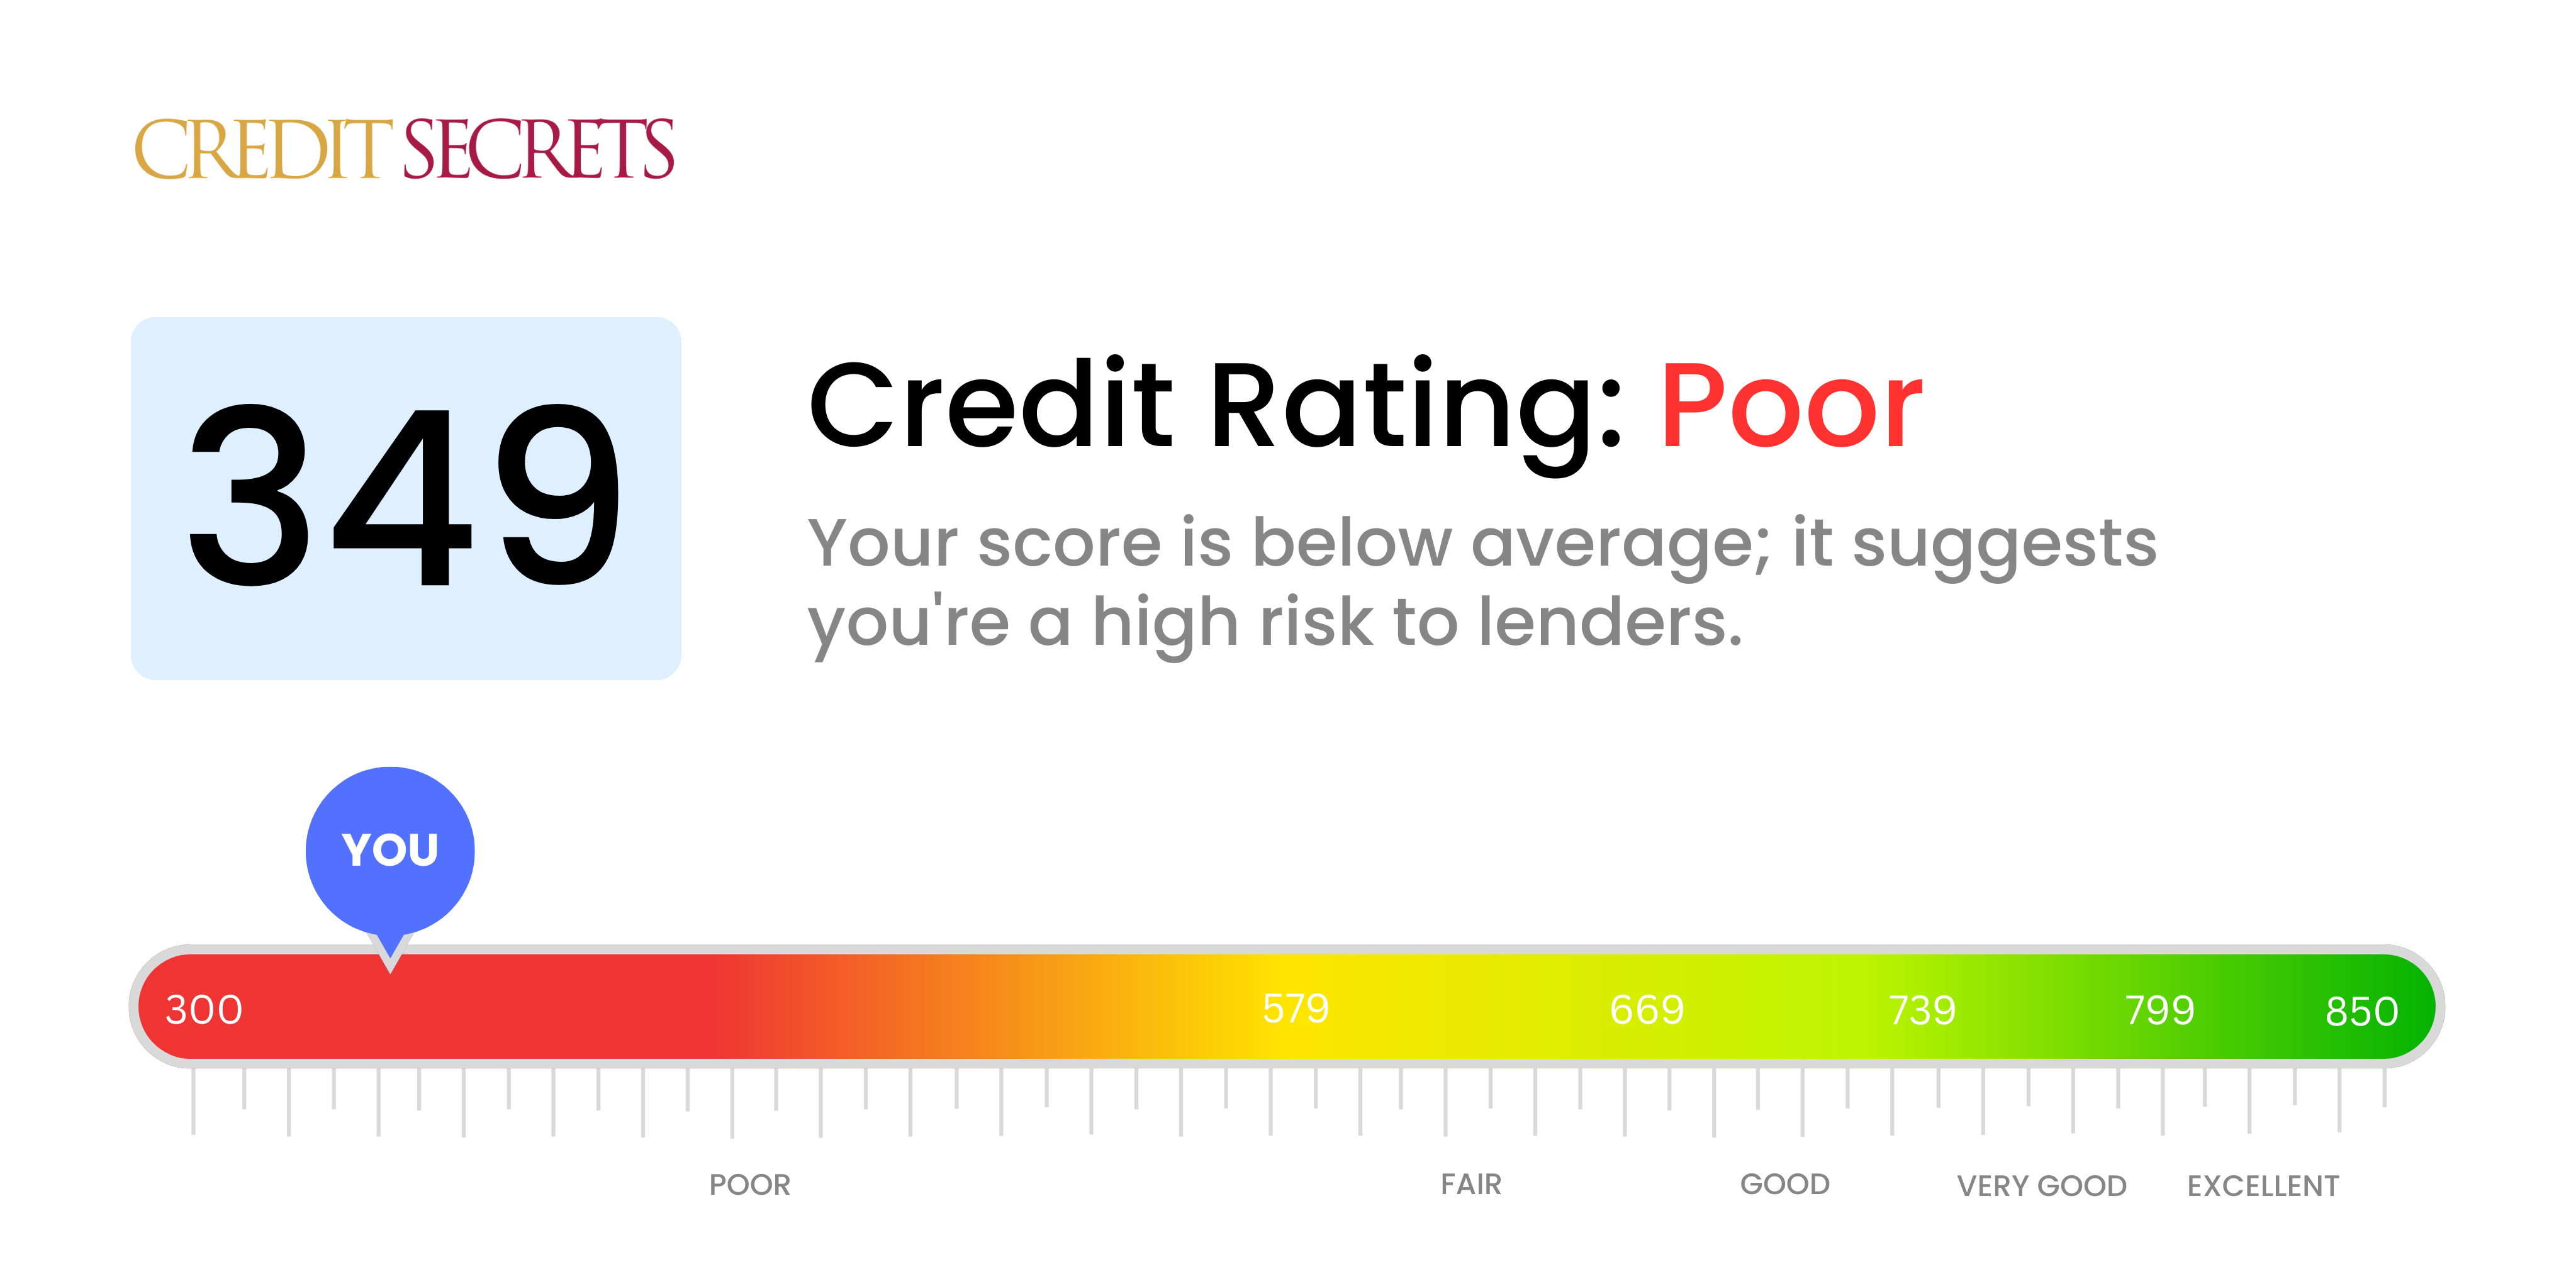 Is 349 a good credit score?